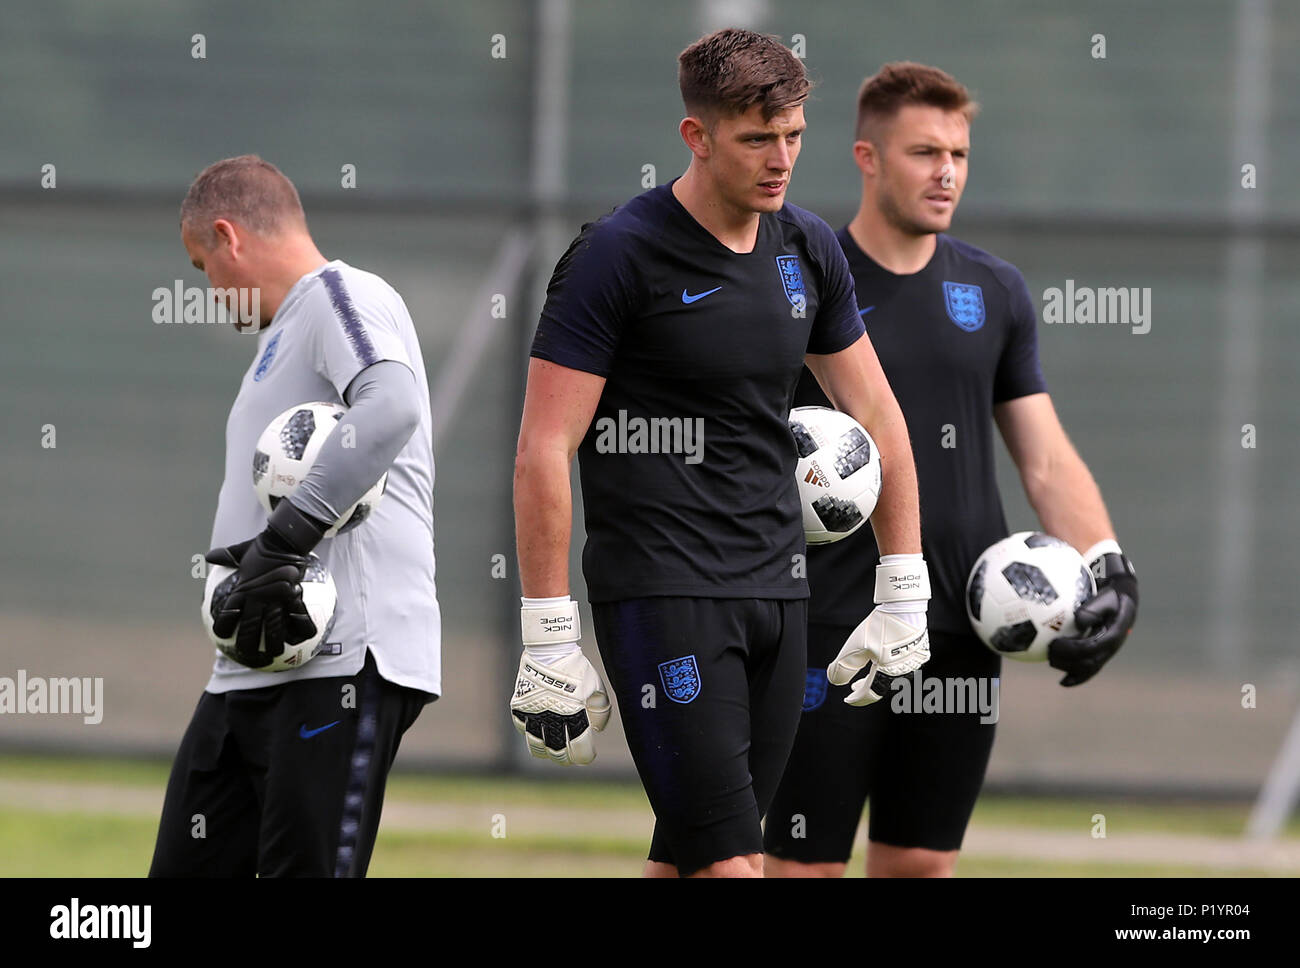 England goalkeepers Nick Pope (centre) and Jack Butland (right) during the training session at the Spartak Zelenogorsk Stadium, Repino. PRESS ASSOCIATION Photo. Picture date: Wednesday June 13, 2018. See PA story WORLDCUP England. Photo credit should read: Owen Humphreys/PA Wire. RESTRICTIONS: Use subject to FA restrictions. Editorial use only. Commercial use only with prior written consent of the FA. No editing except cropping. Stock Photo